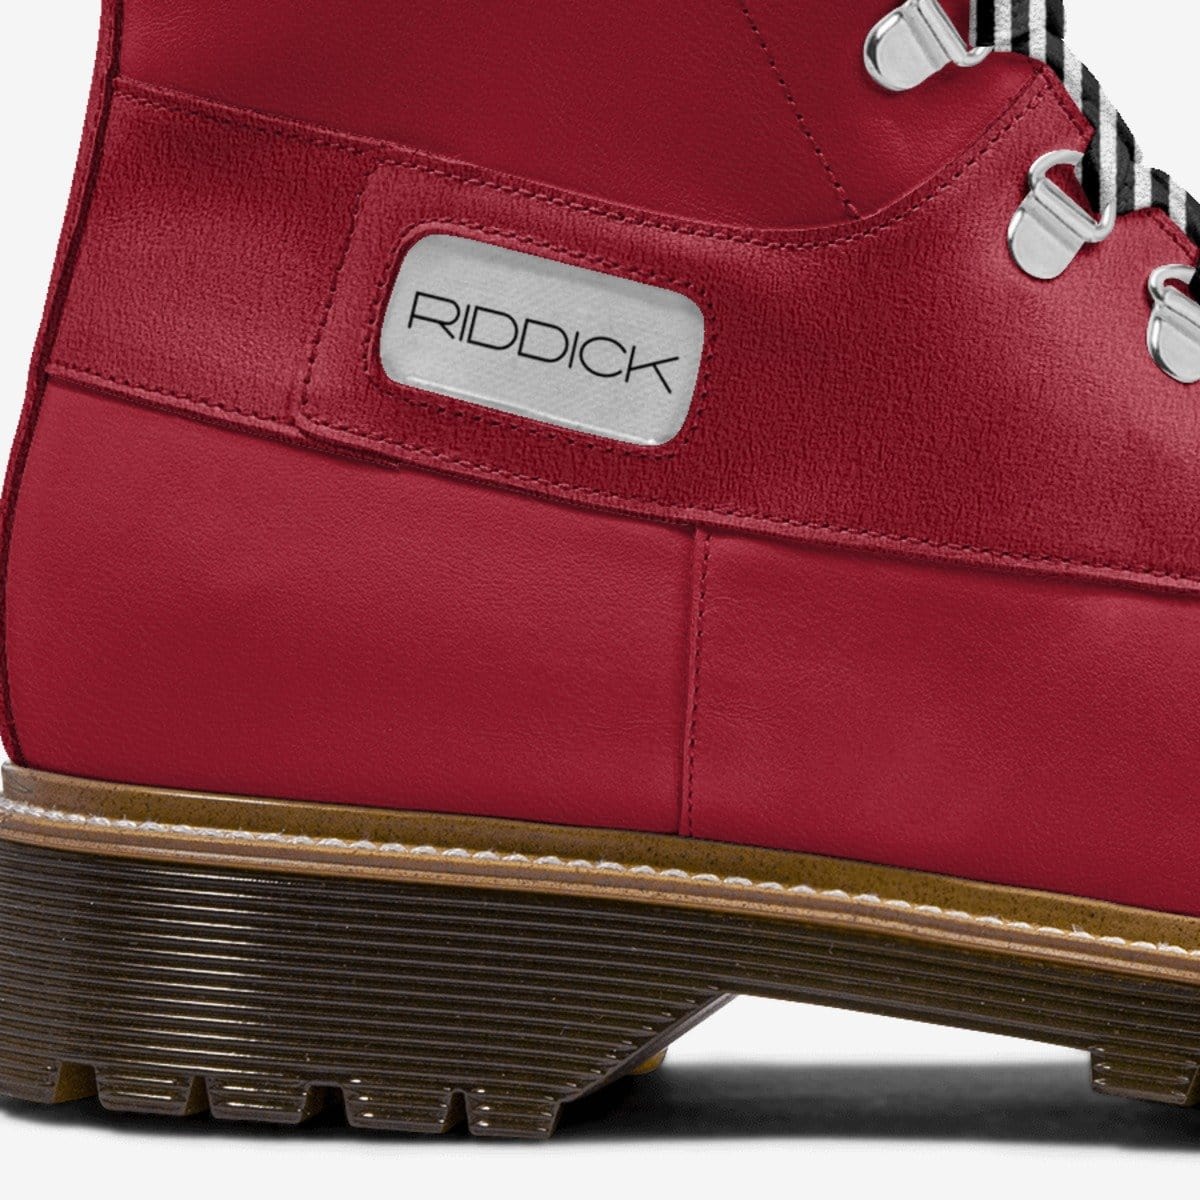 RED DAWN HIKE IN RED - Riddick Shoes Shoe Riddick Shoes   